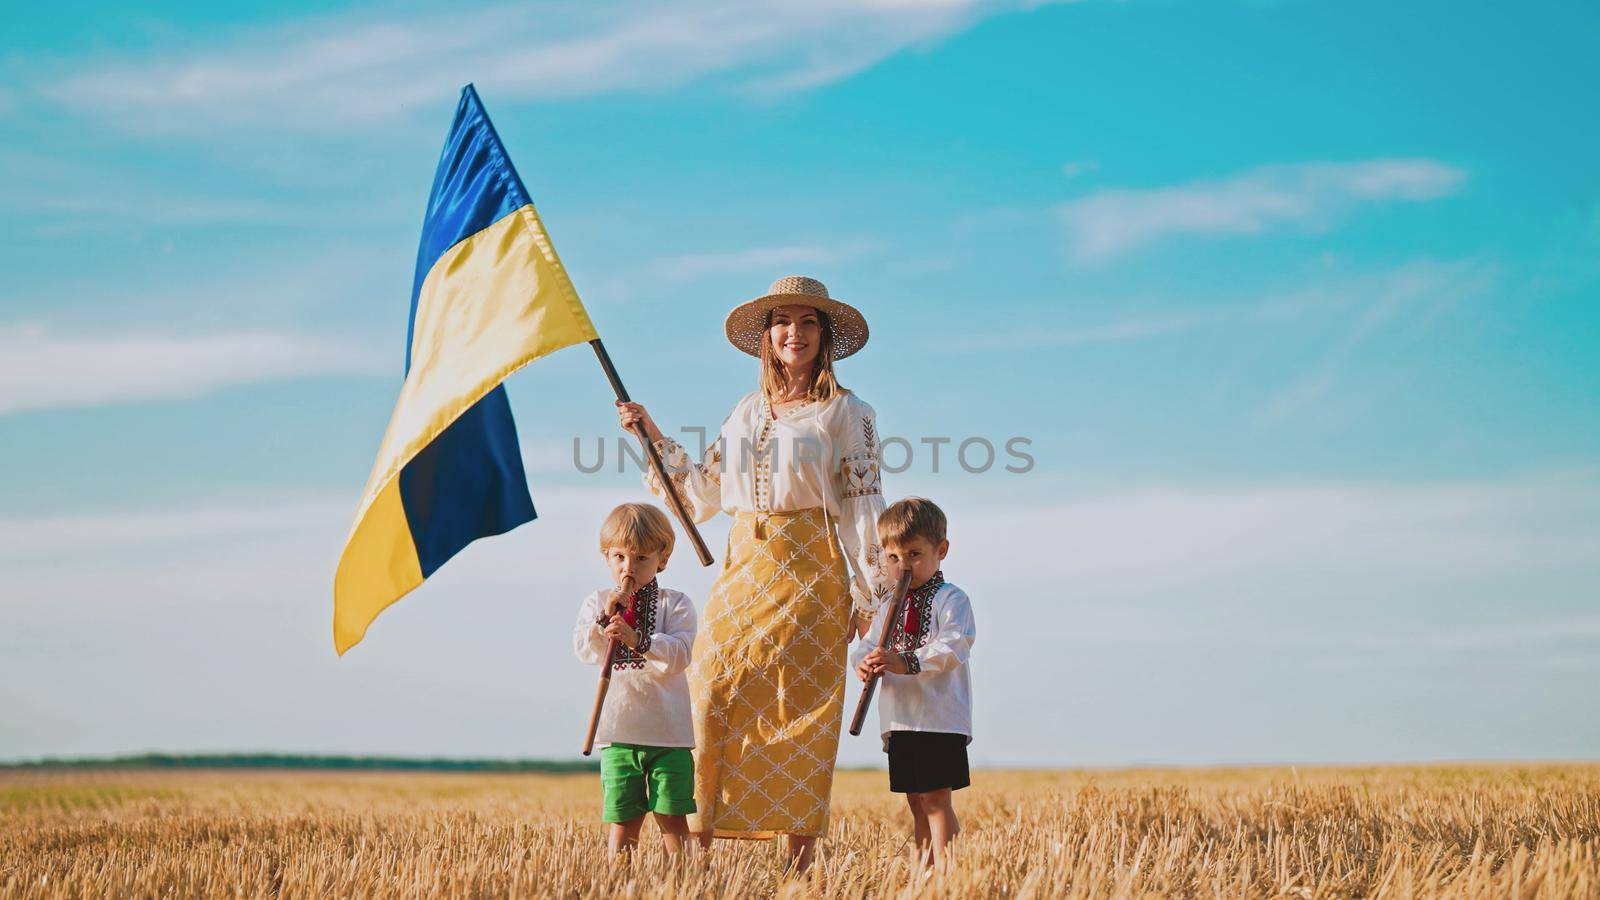 Ukrainian mother with children sons waving national flag in wheat field. Woman in embroidery vyshyvanka. Boys playing flutes. Ukraine, independence, freedom, patriot symbol, VICTORY, win in war. by kristina_kokhanova